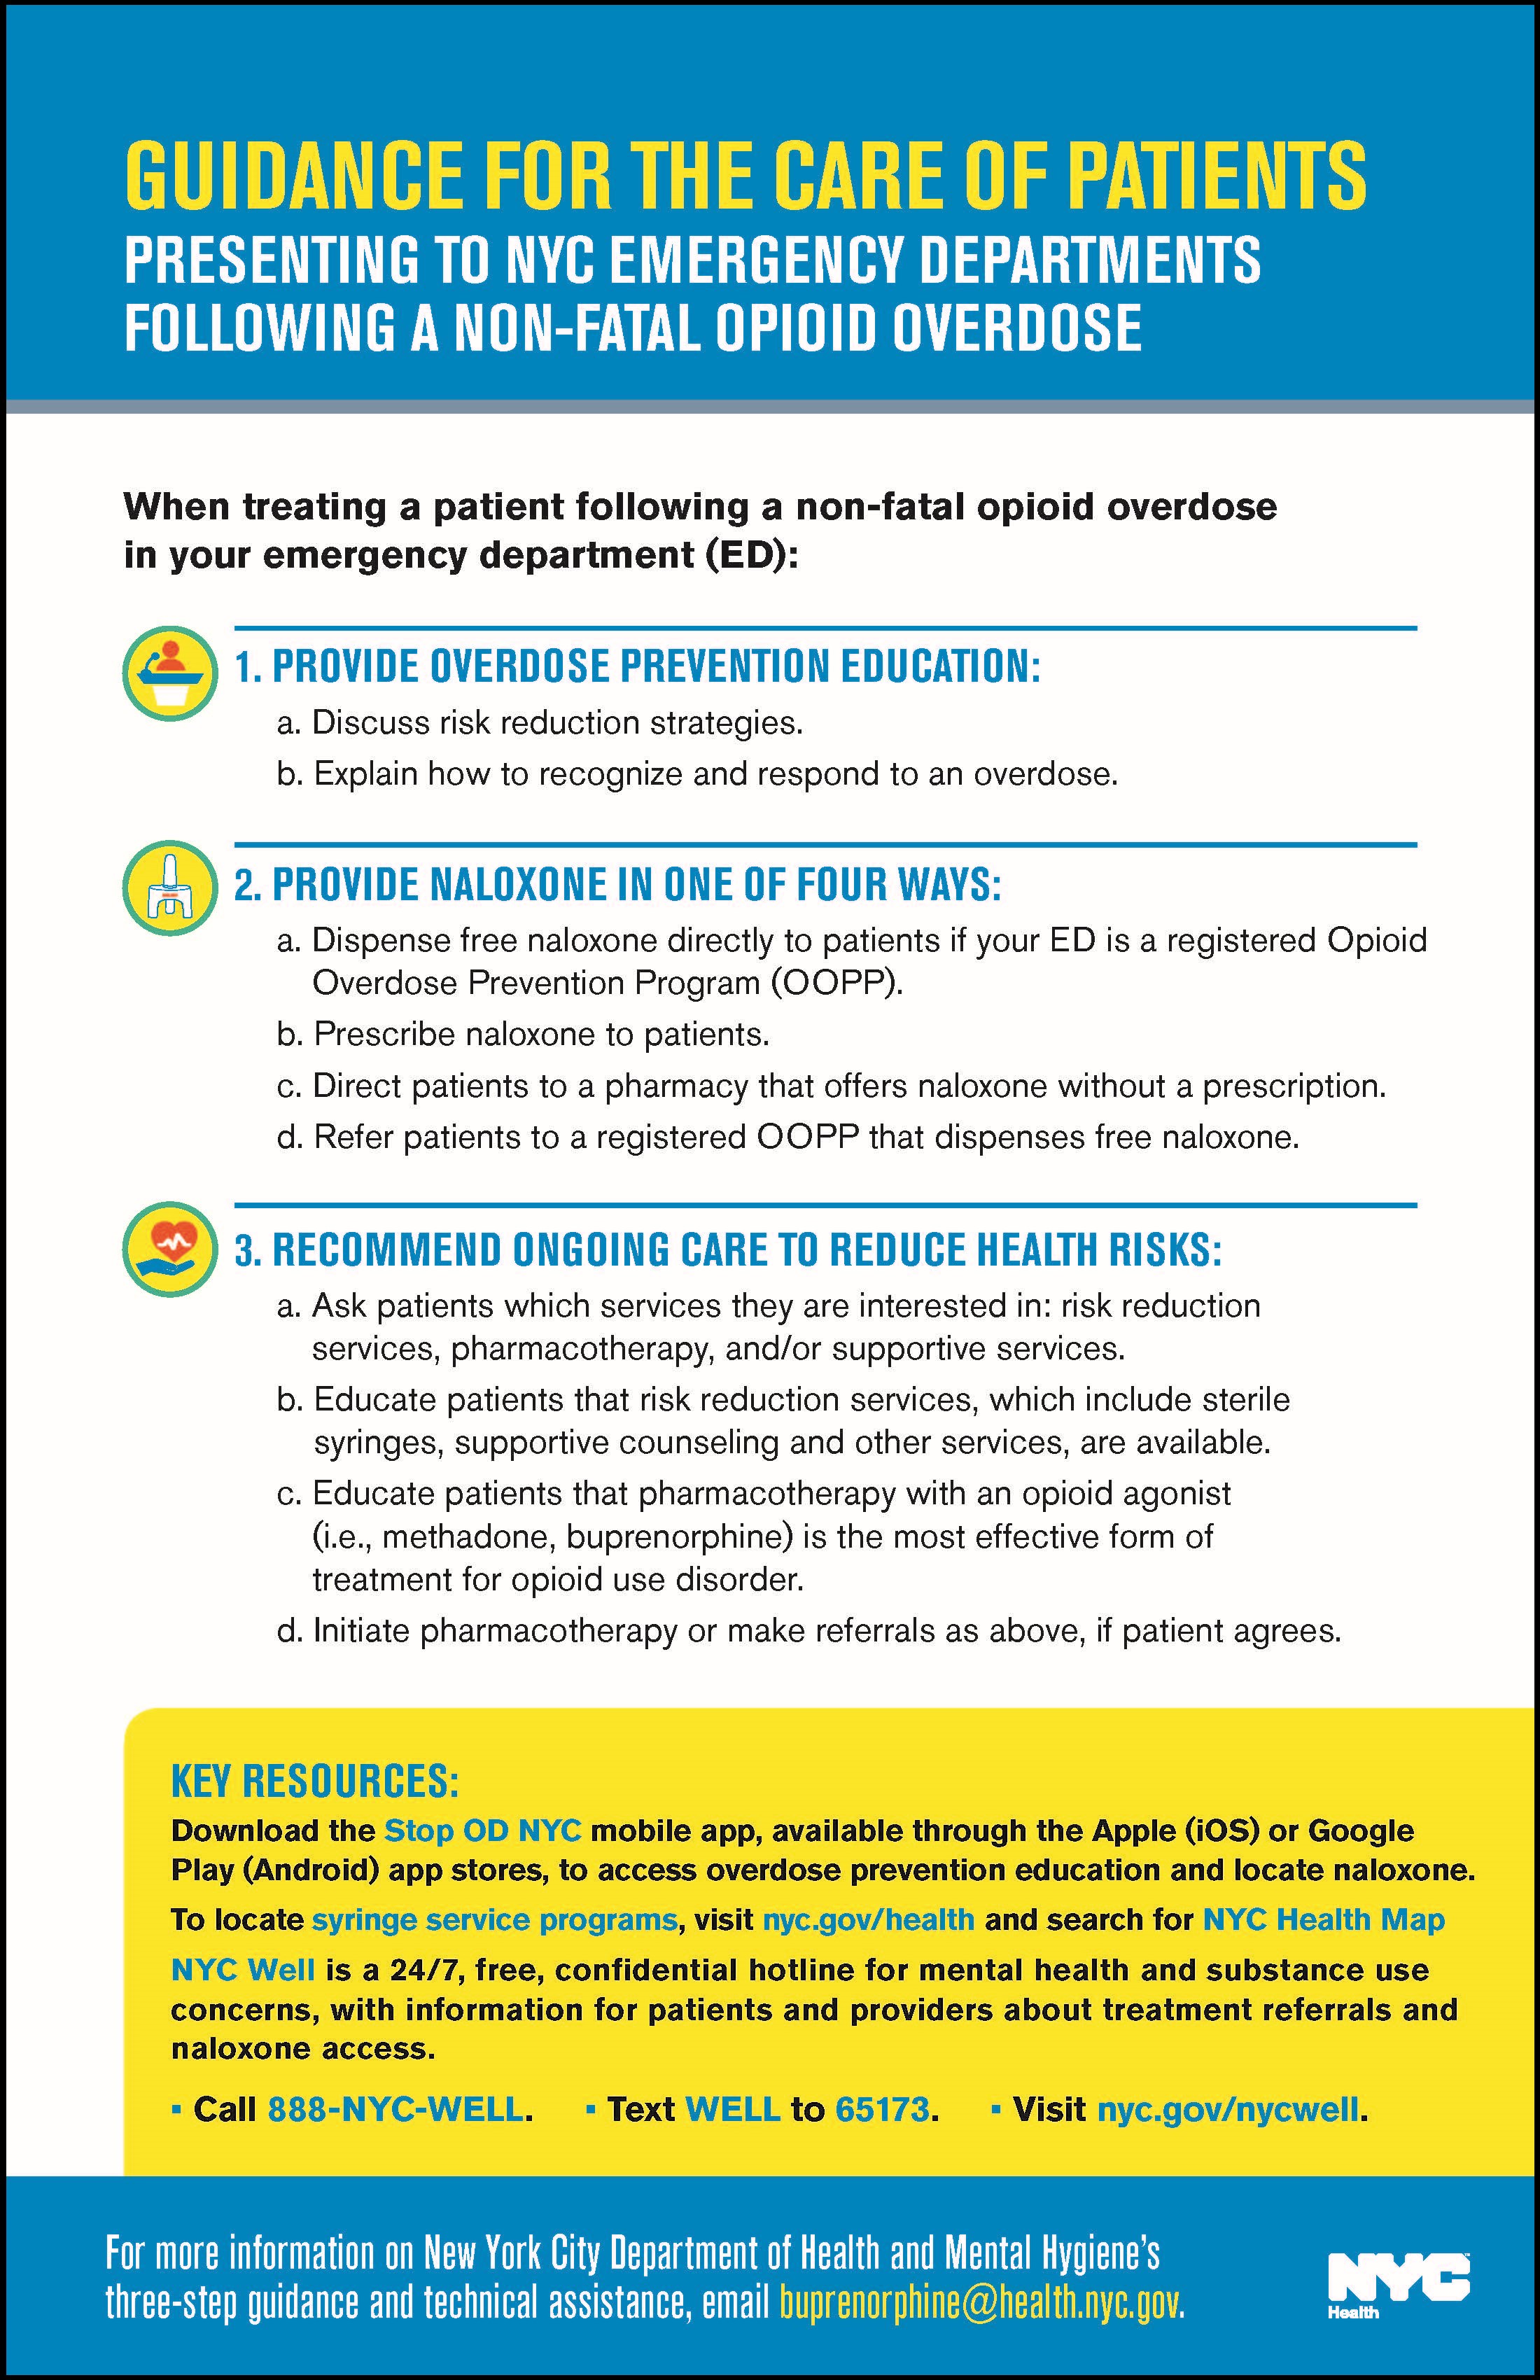 Poster describing guidance for the care of patients experiencing non-fatal overdose